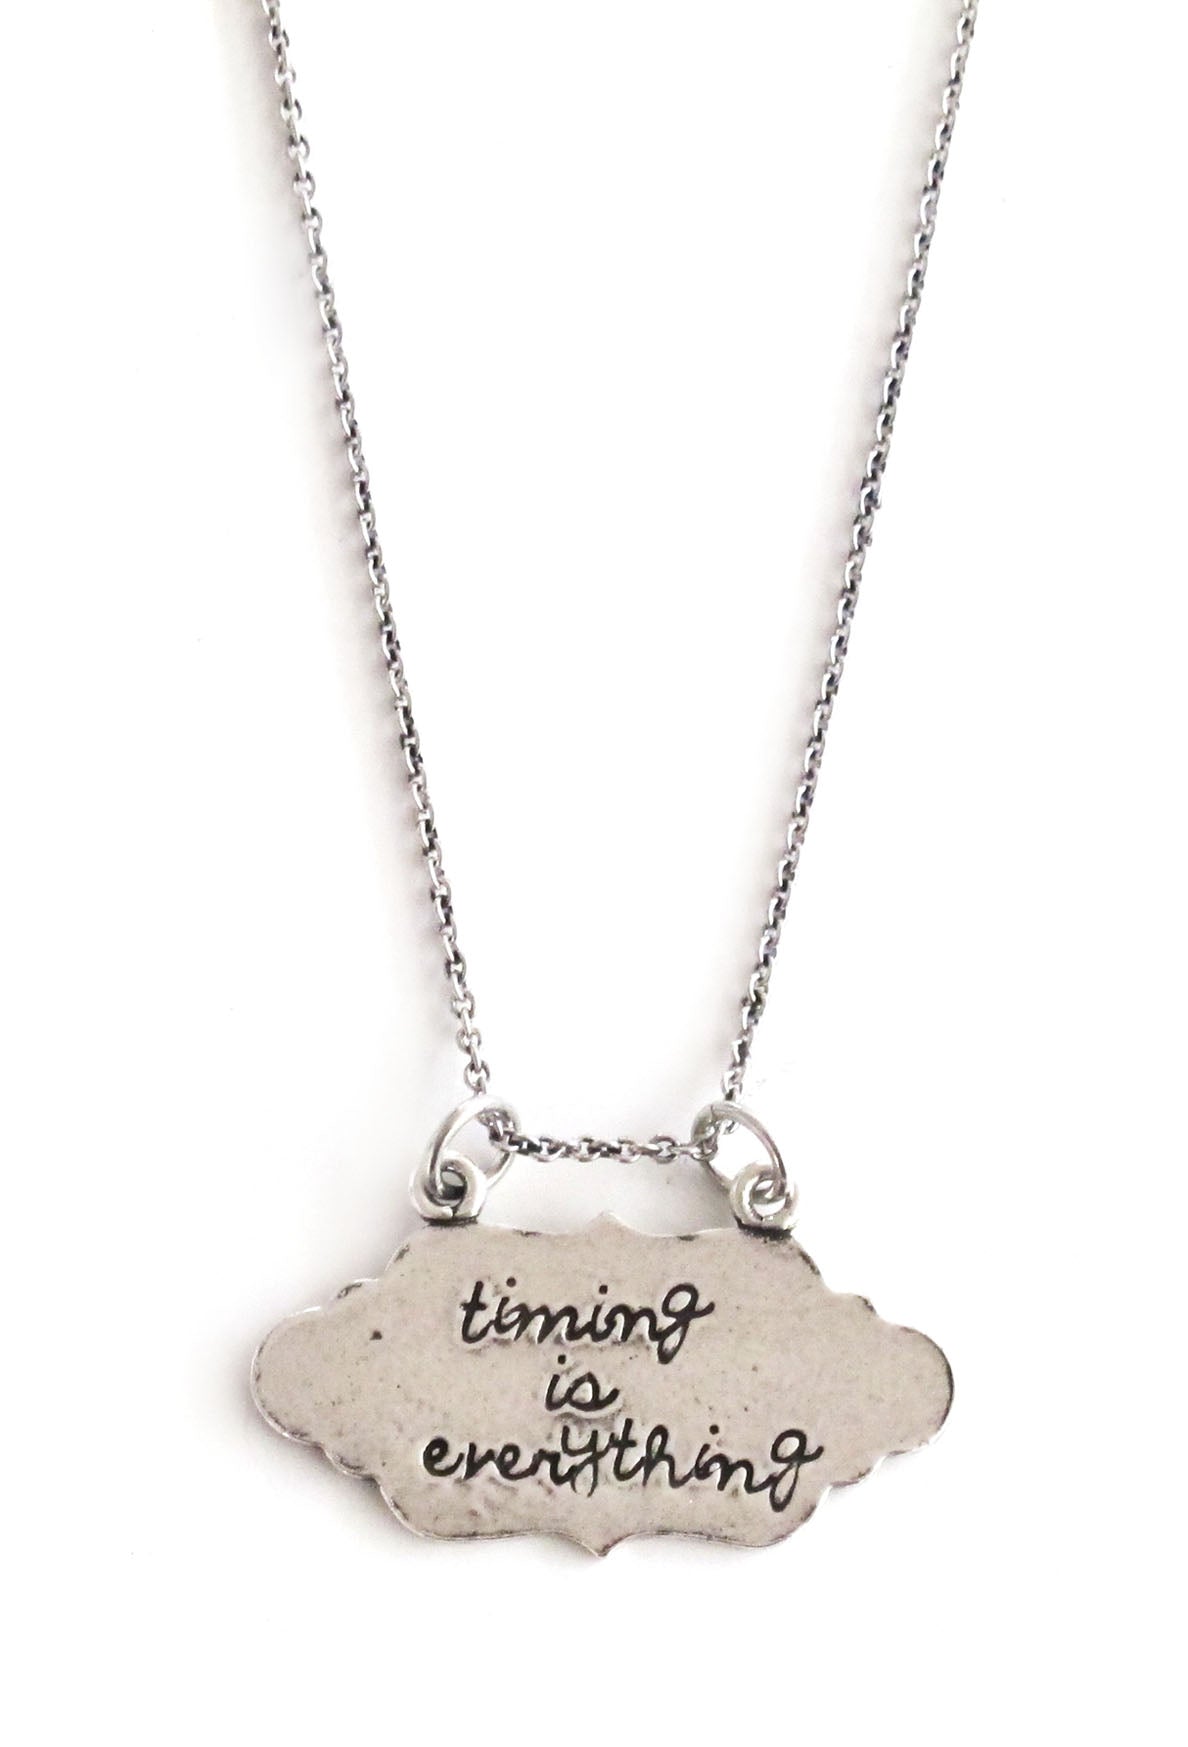 Inspirational necklace about timing